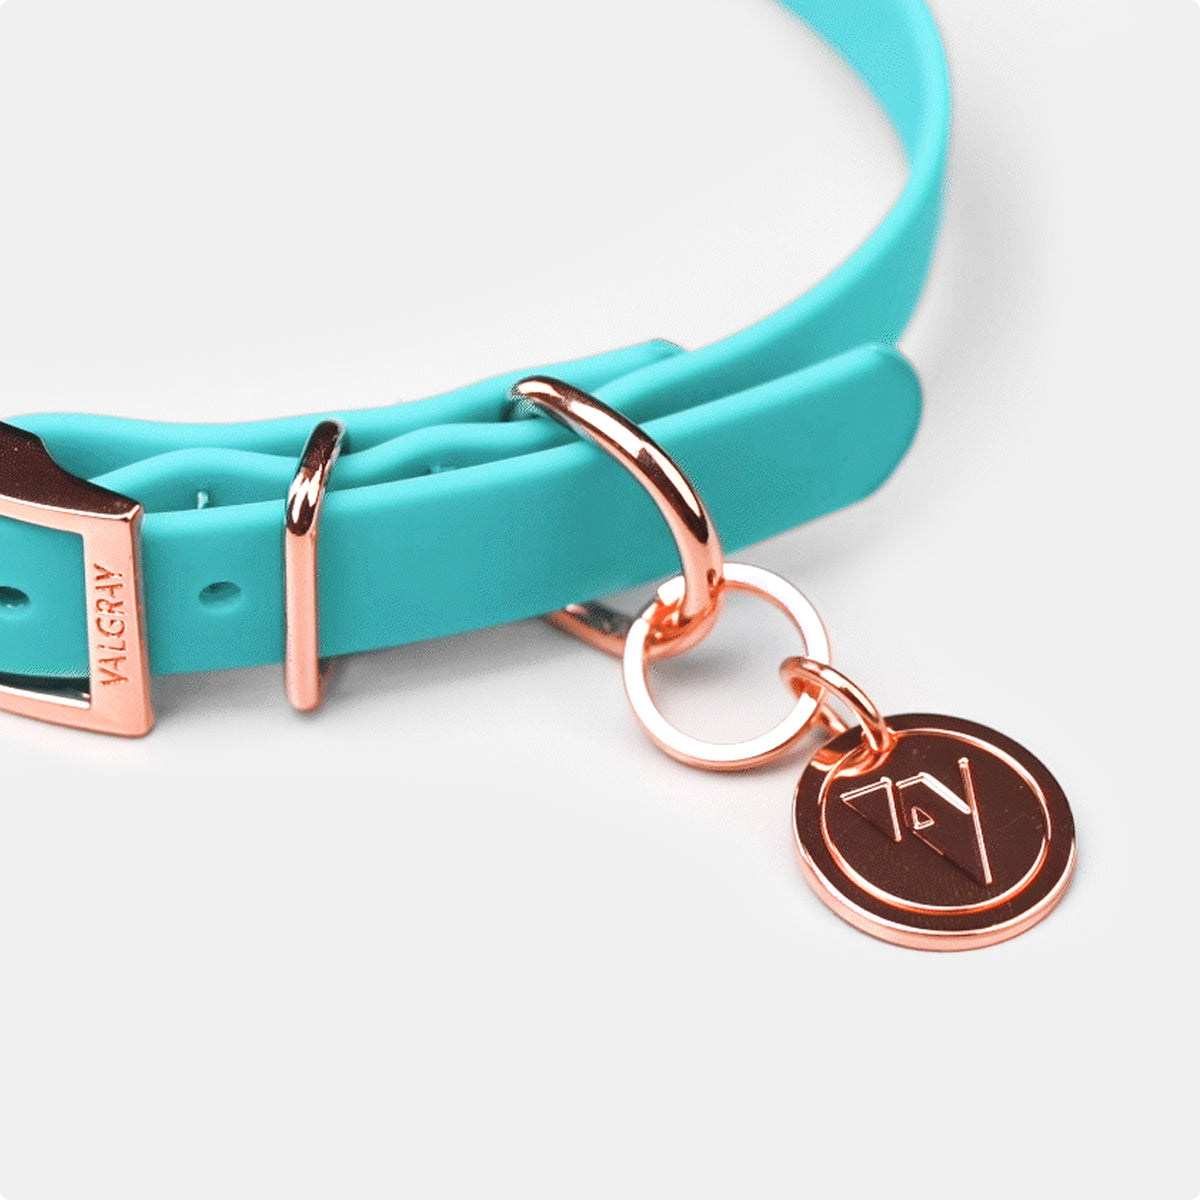 Valgray Premium Dog Collar for Small Dogs - Turquoise & Rose Gold